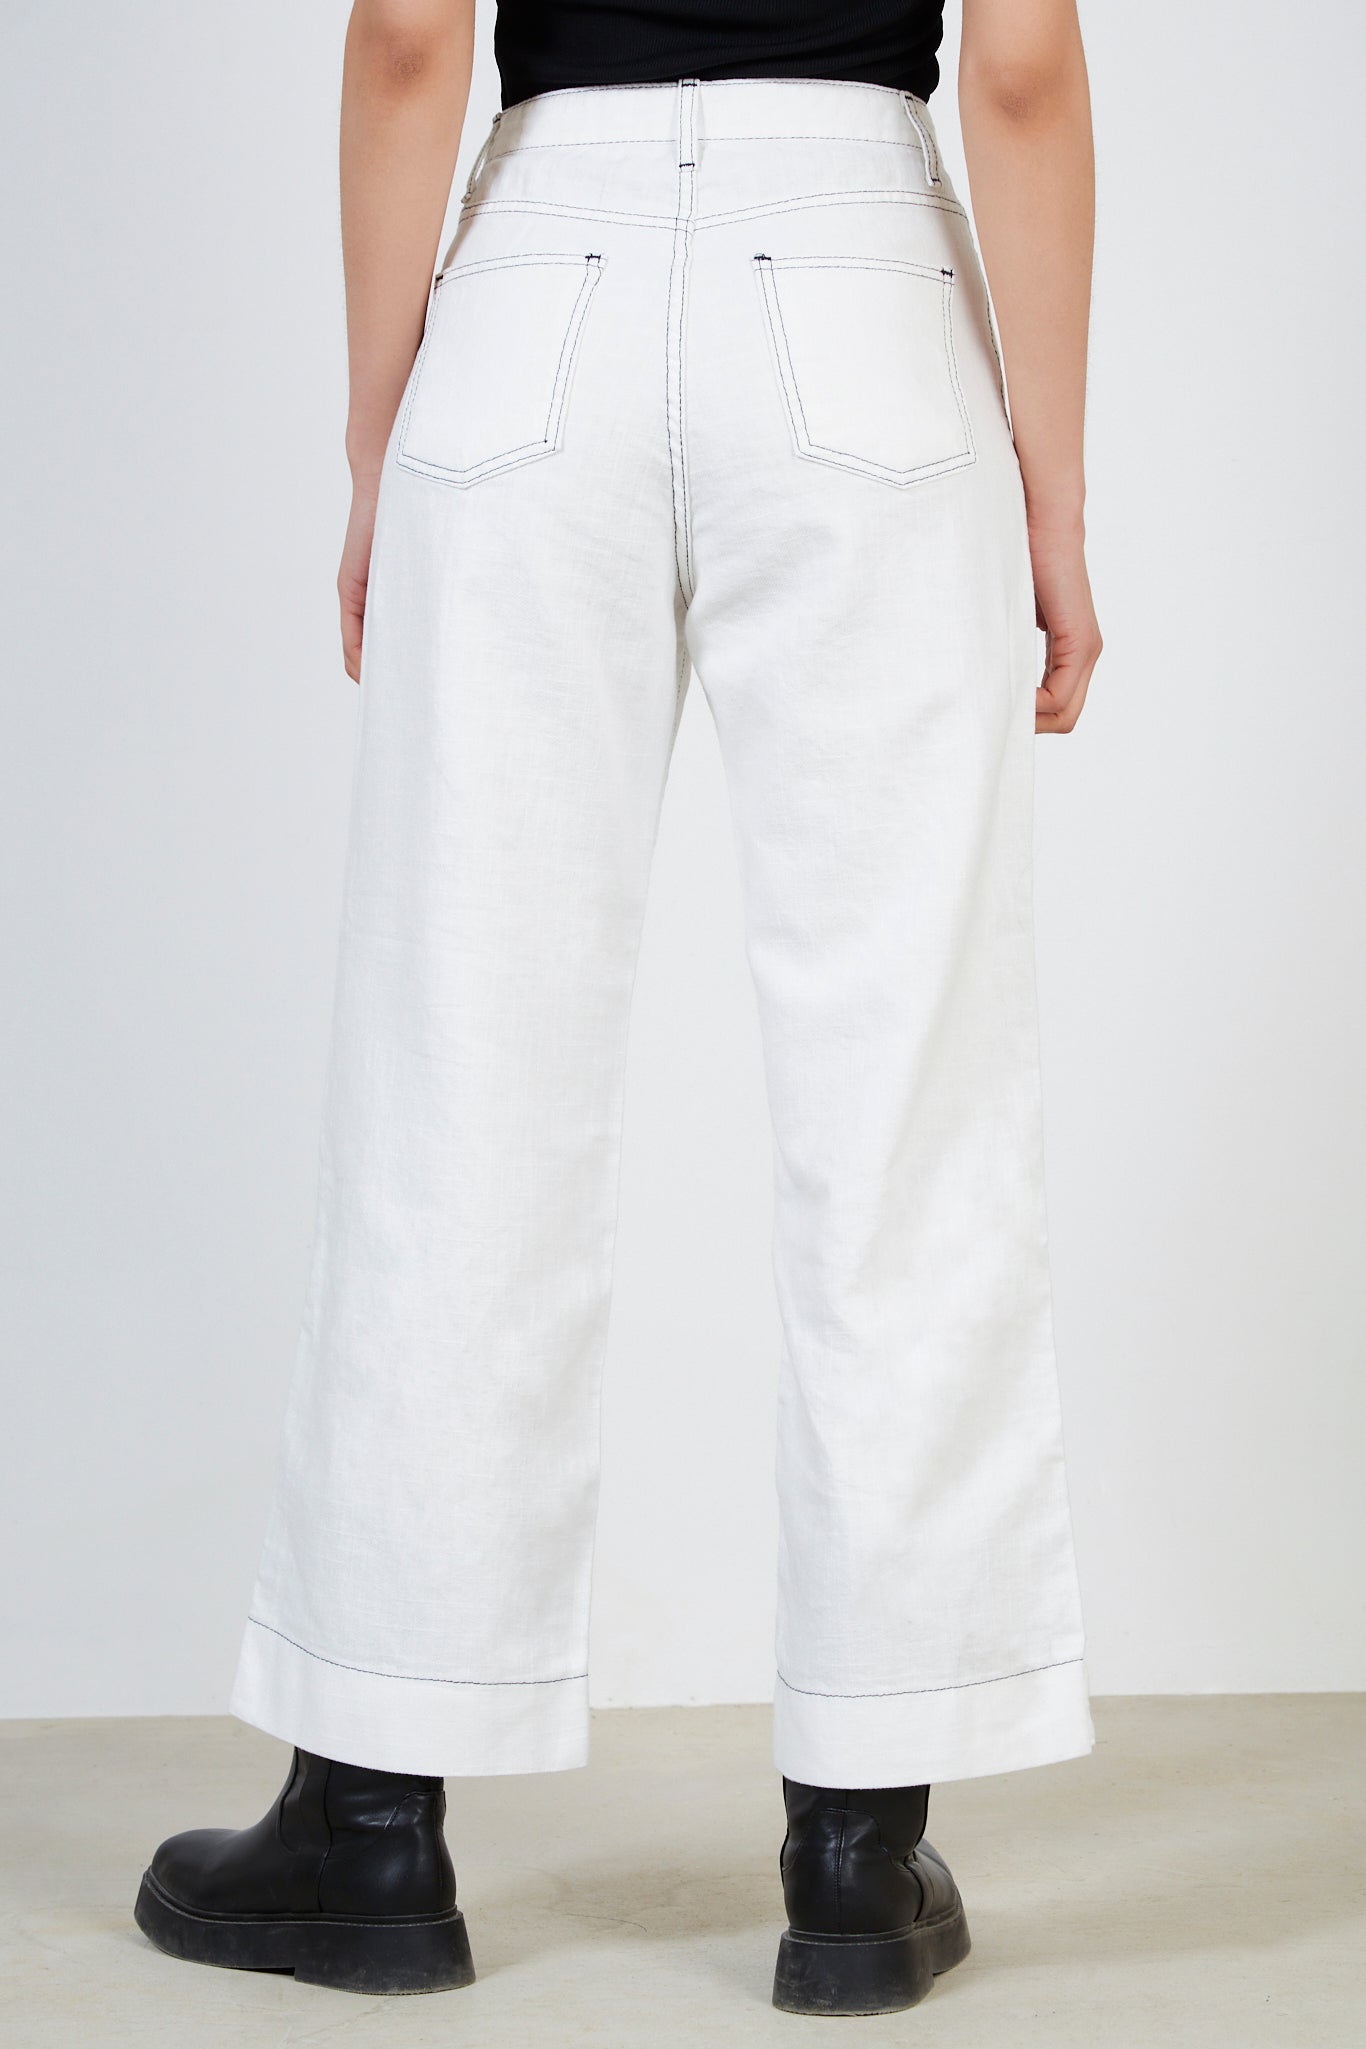 White and black lightweight wide leg contrast stitch jeans